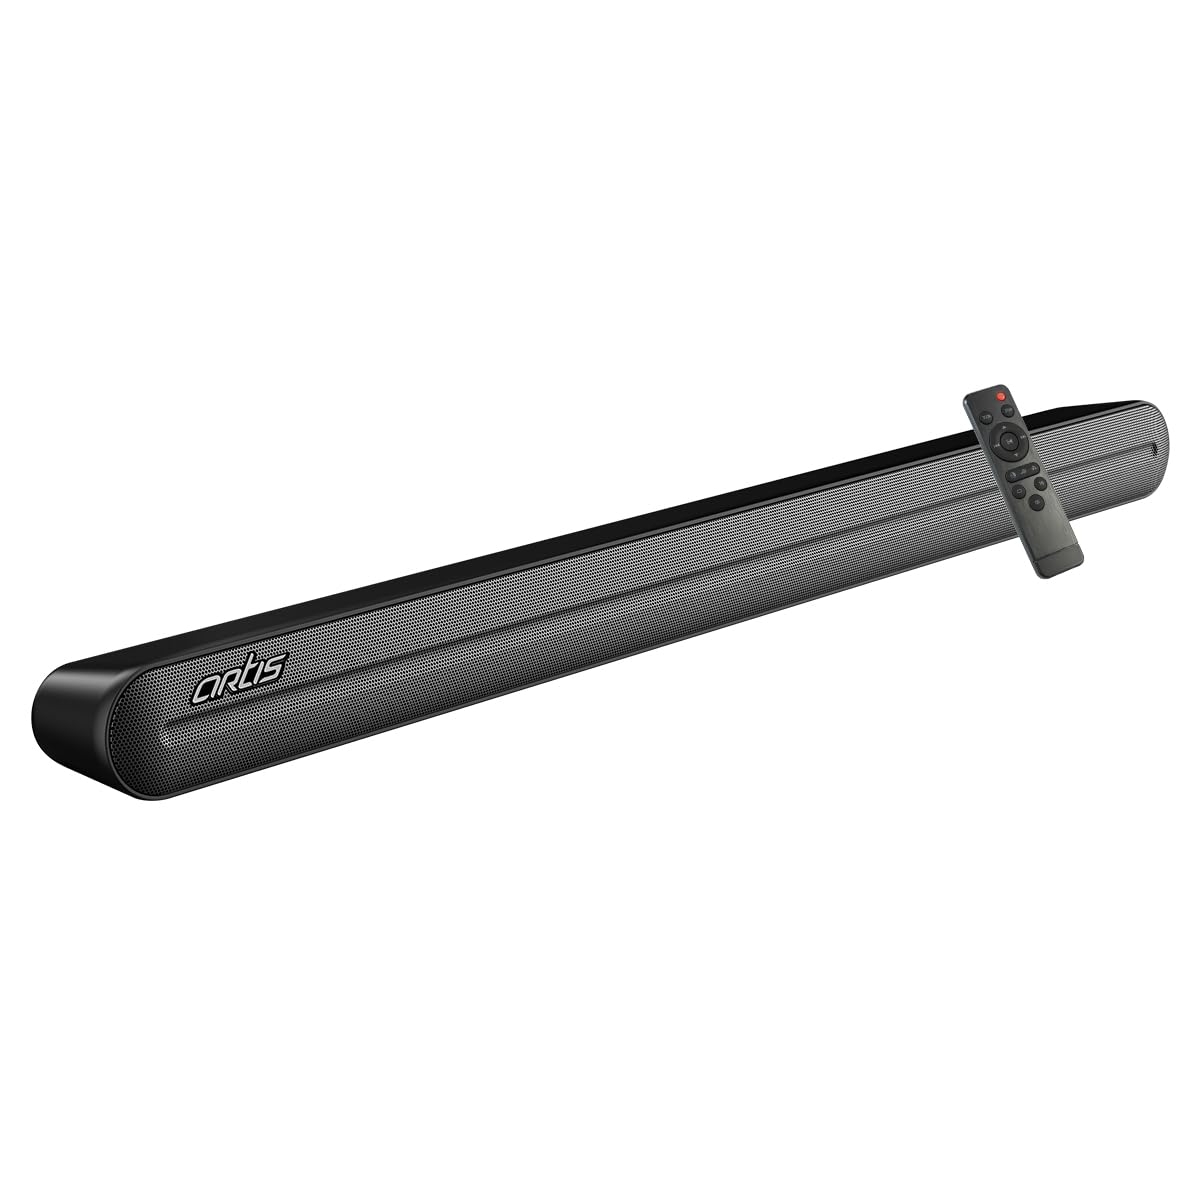 Artis BT X5 60 Watts Wireless Bluetooth 5.0 Sound bar with 3EQ Pre-Sets,4 Driver Units & Multiple Input Modes: Bluetooth/HDMI(ARC) / AUX in/Optical/Co-Axial/USB Pen Drive Input